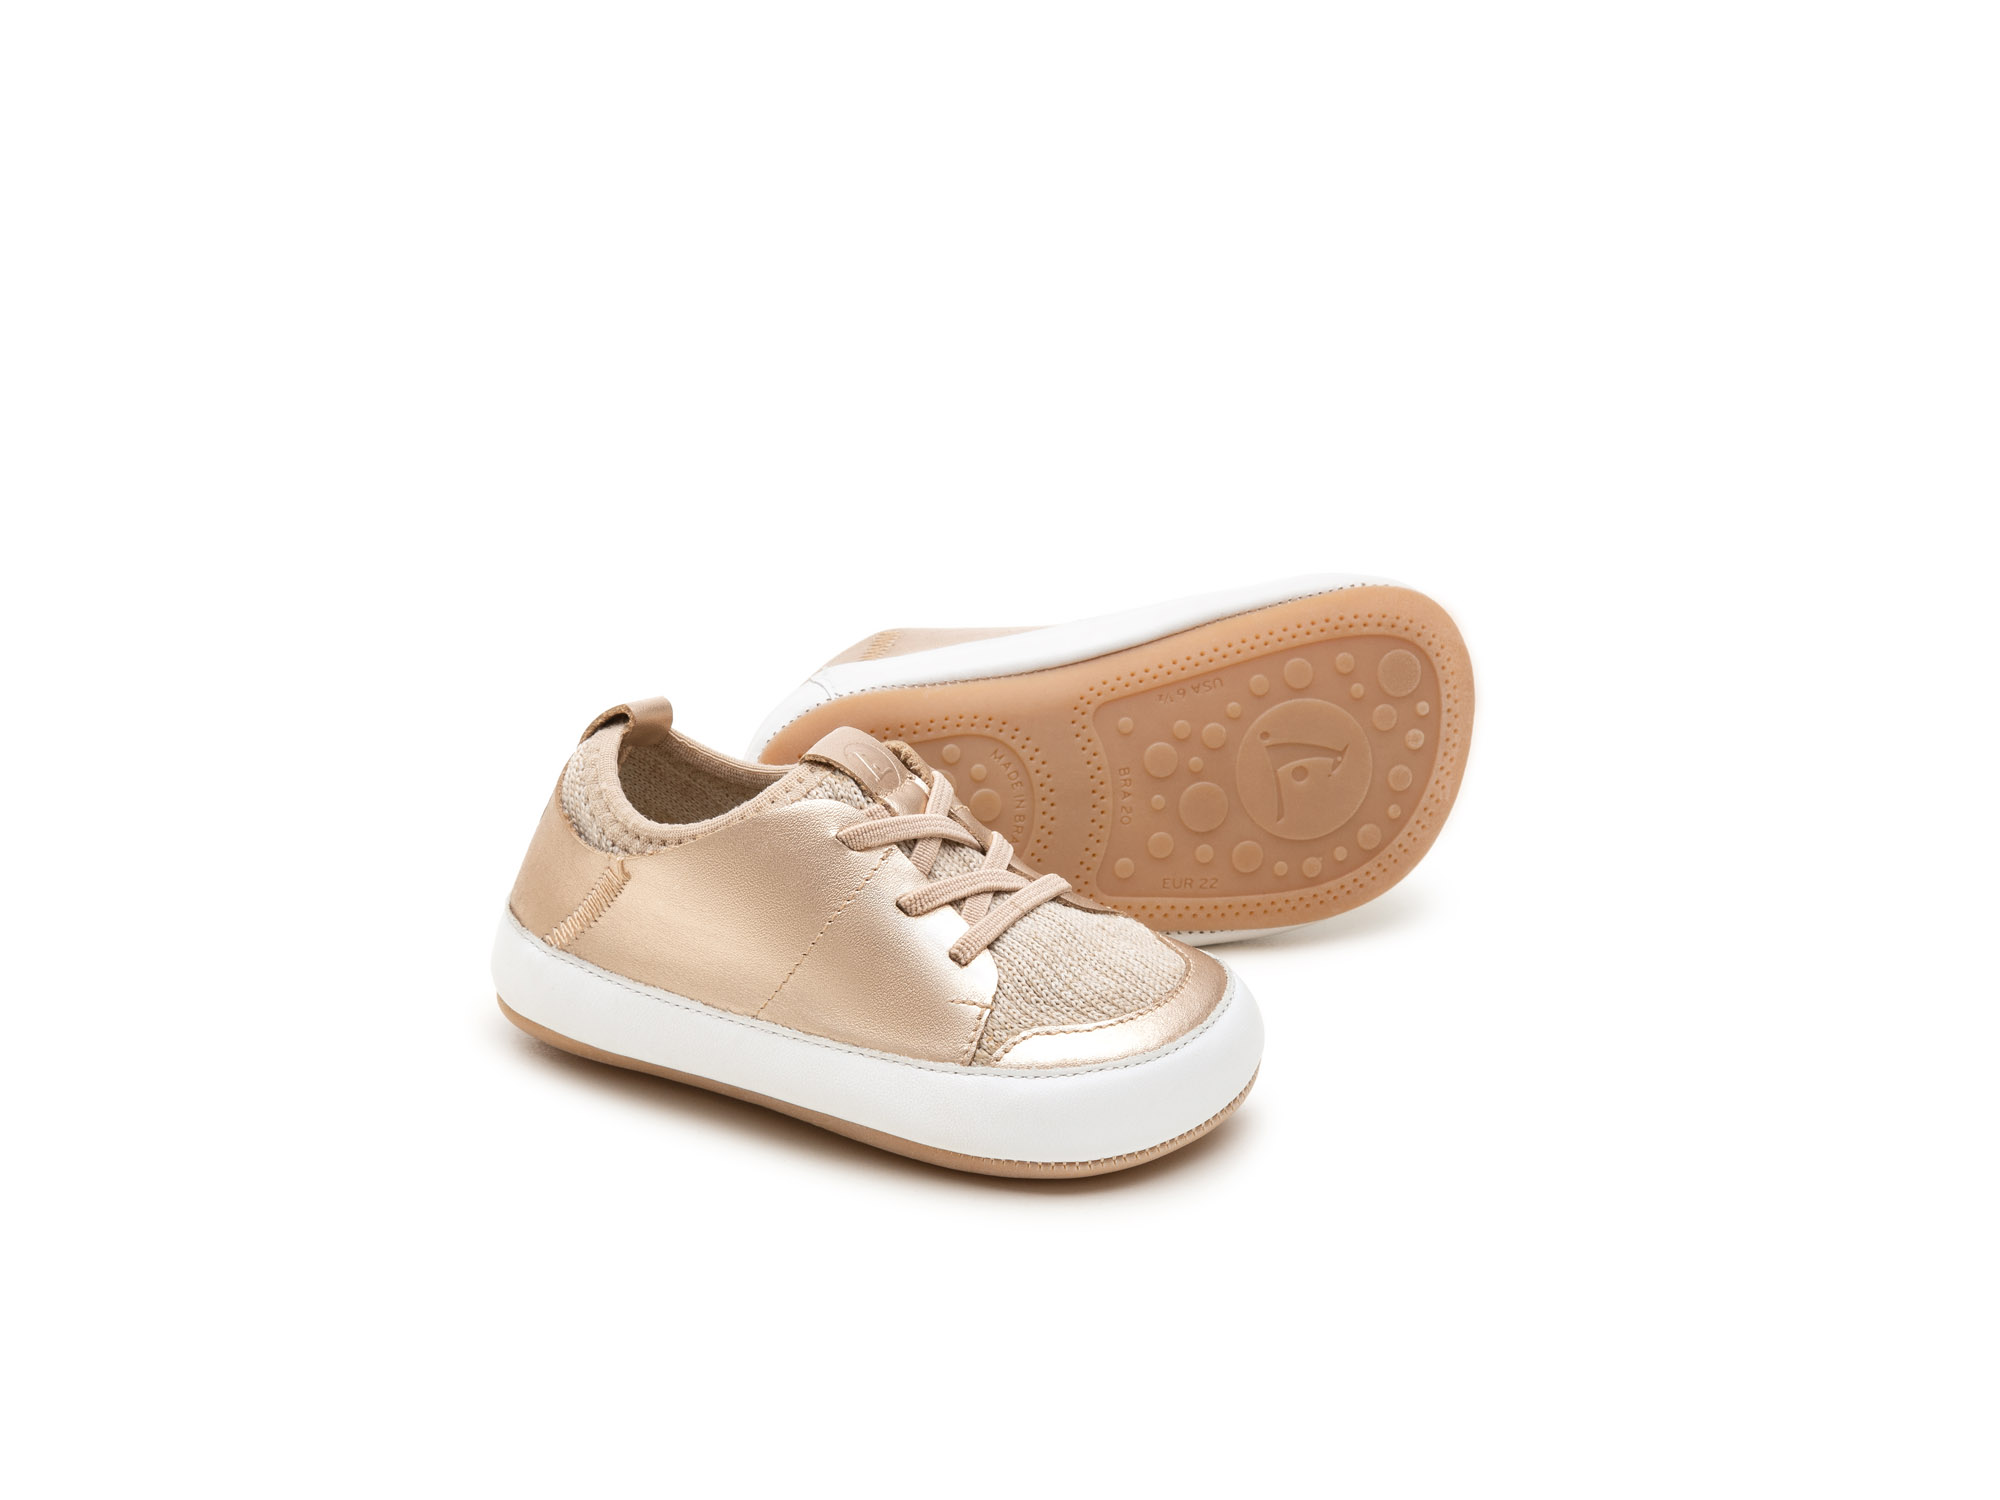 UP & GO Sneakers for Girls Snuggy | Tip Toey Joey - Australia - 0